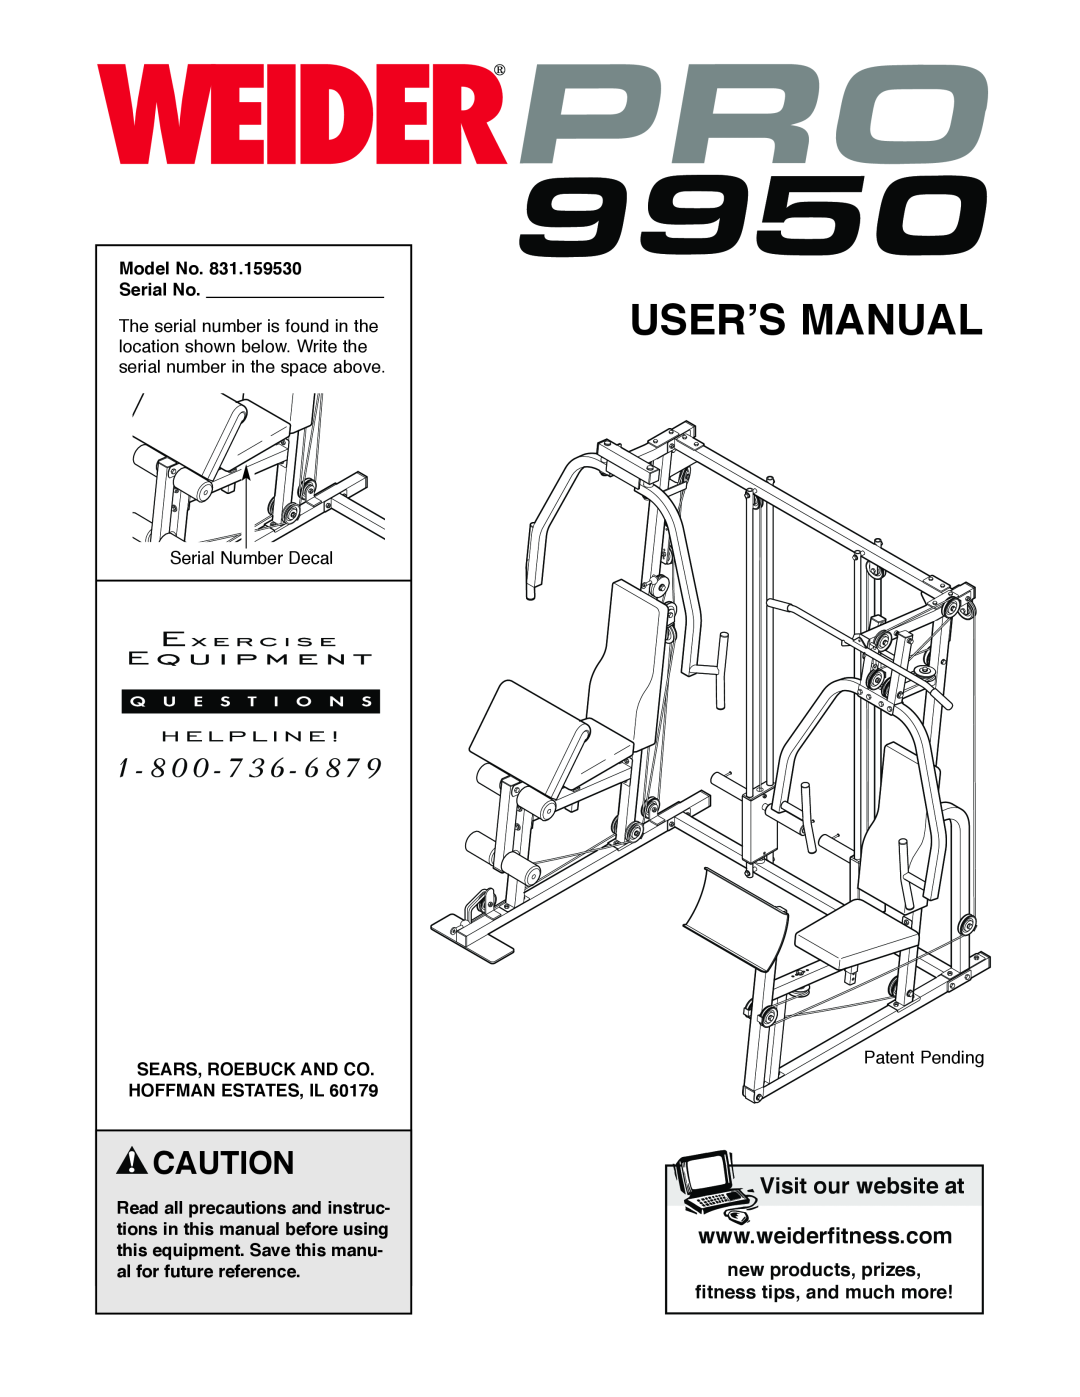 Weider 831.159530 user manual User’S Manual, Visit our website at, new products, prizes fitness tips, and much more 